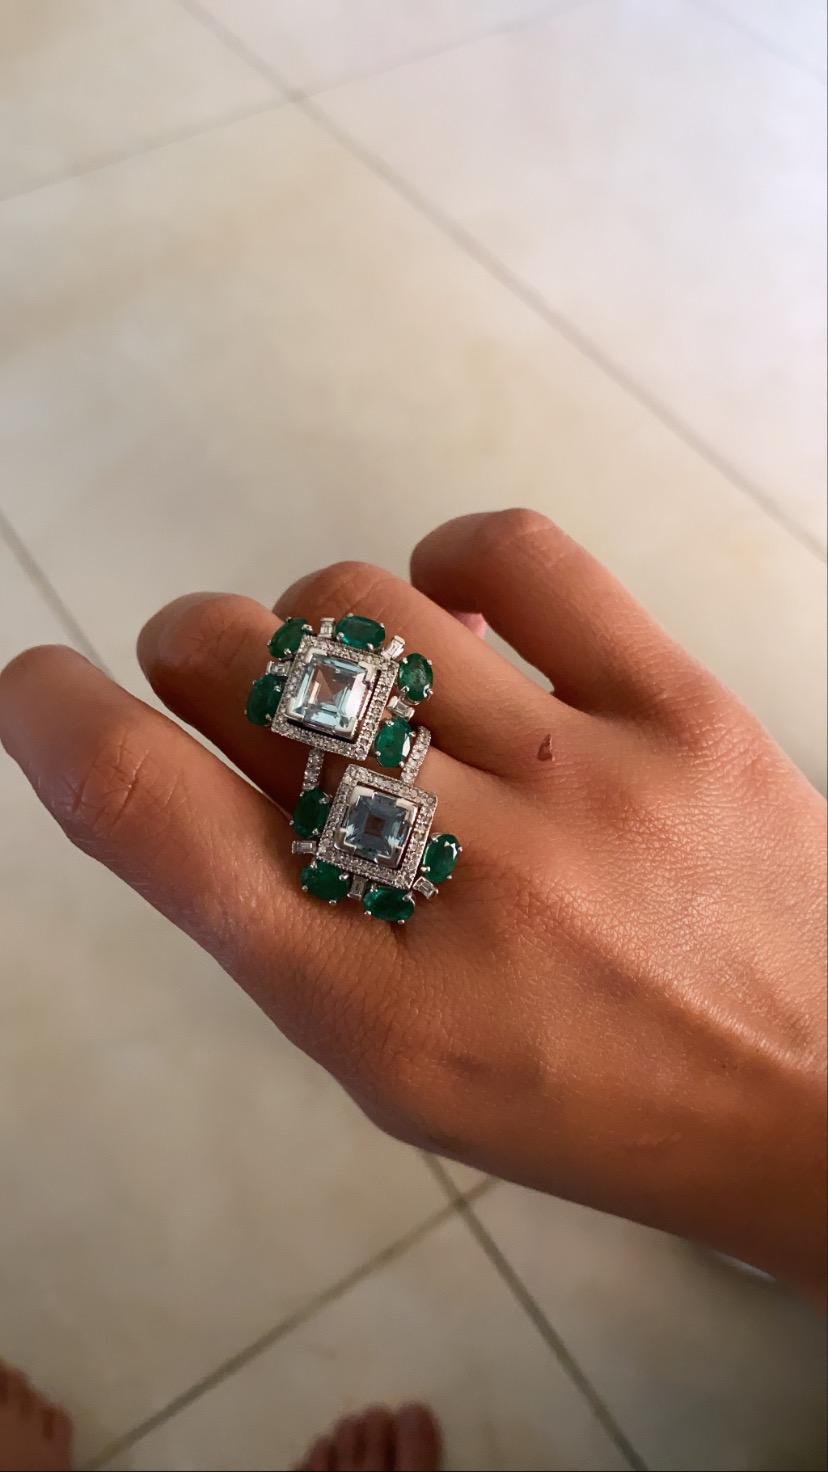 A modern and chic aquamarine and emerald ring set in 18k white gold with diamonds. The aquamarine weight is 4.14 carats, emerald weight is 3.88 carats and diamond weight is .51 carats. The net gold weight is 10.15 carats and ring dimension in cm 3.8